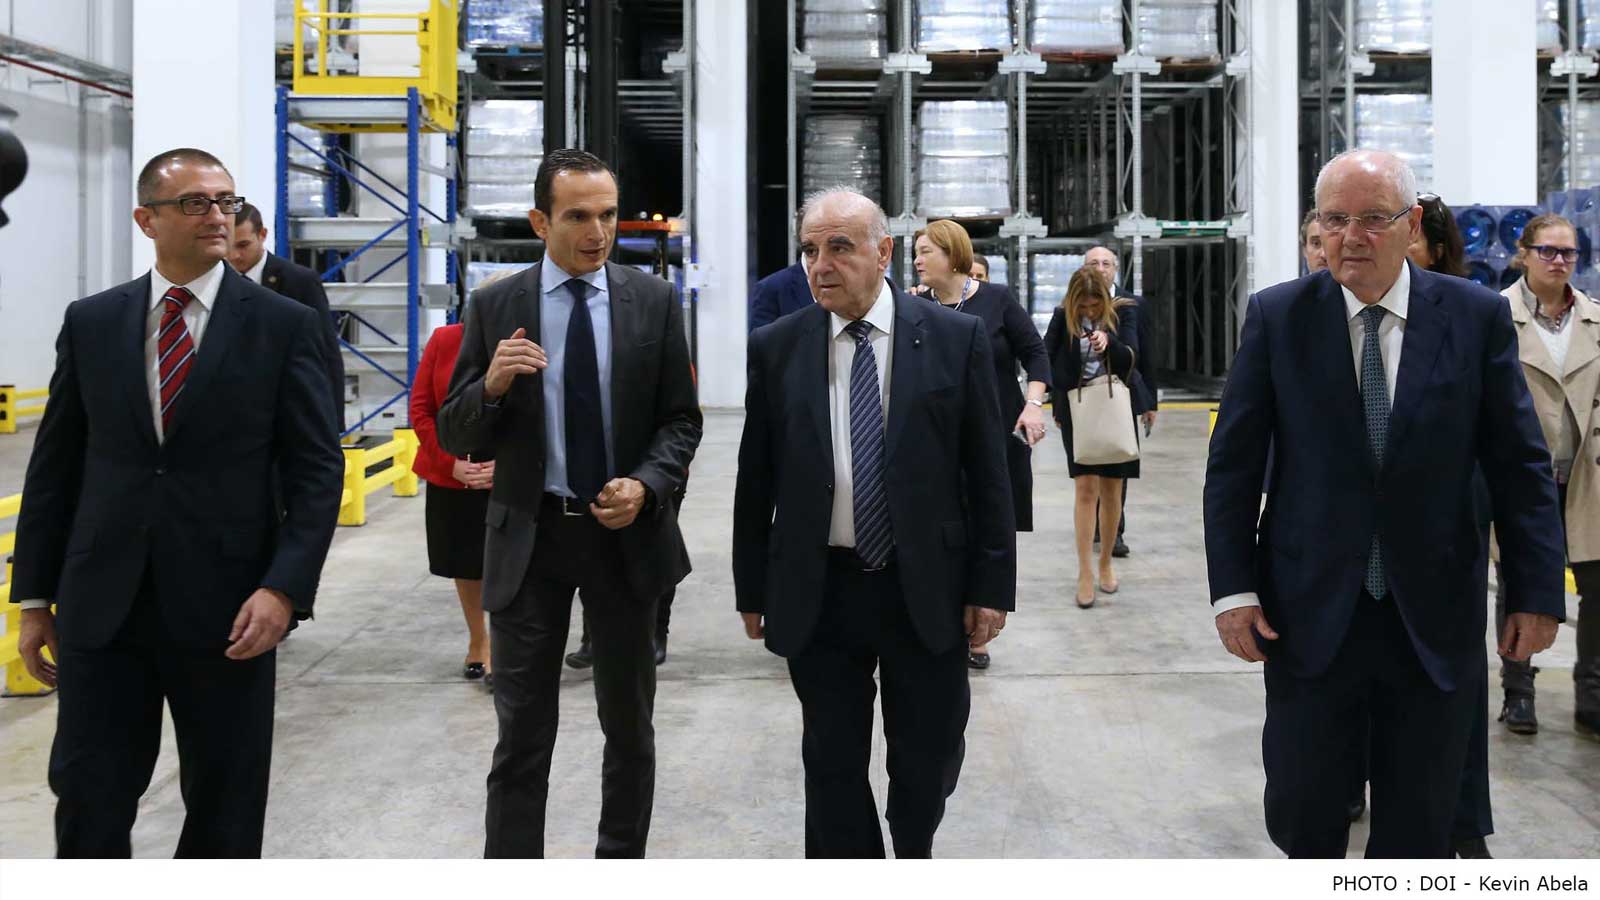 HE The President of Malta and Mrs Vella visit Farsons Brewery